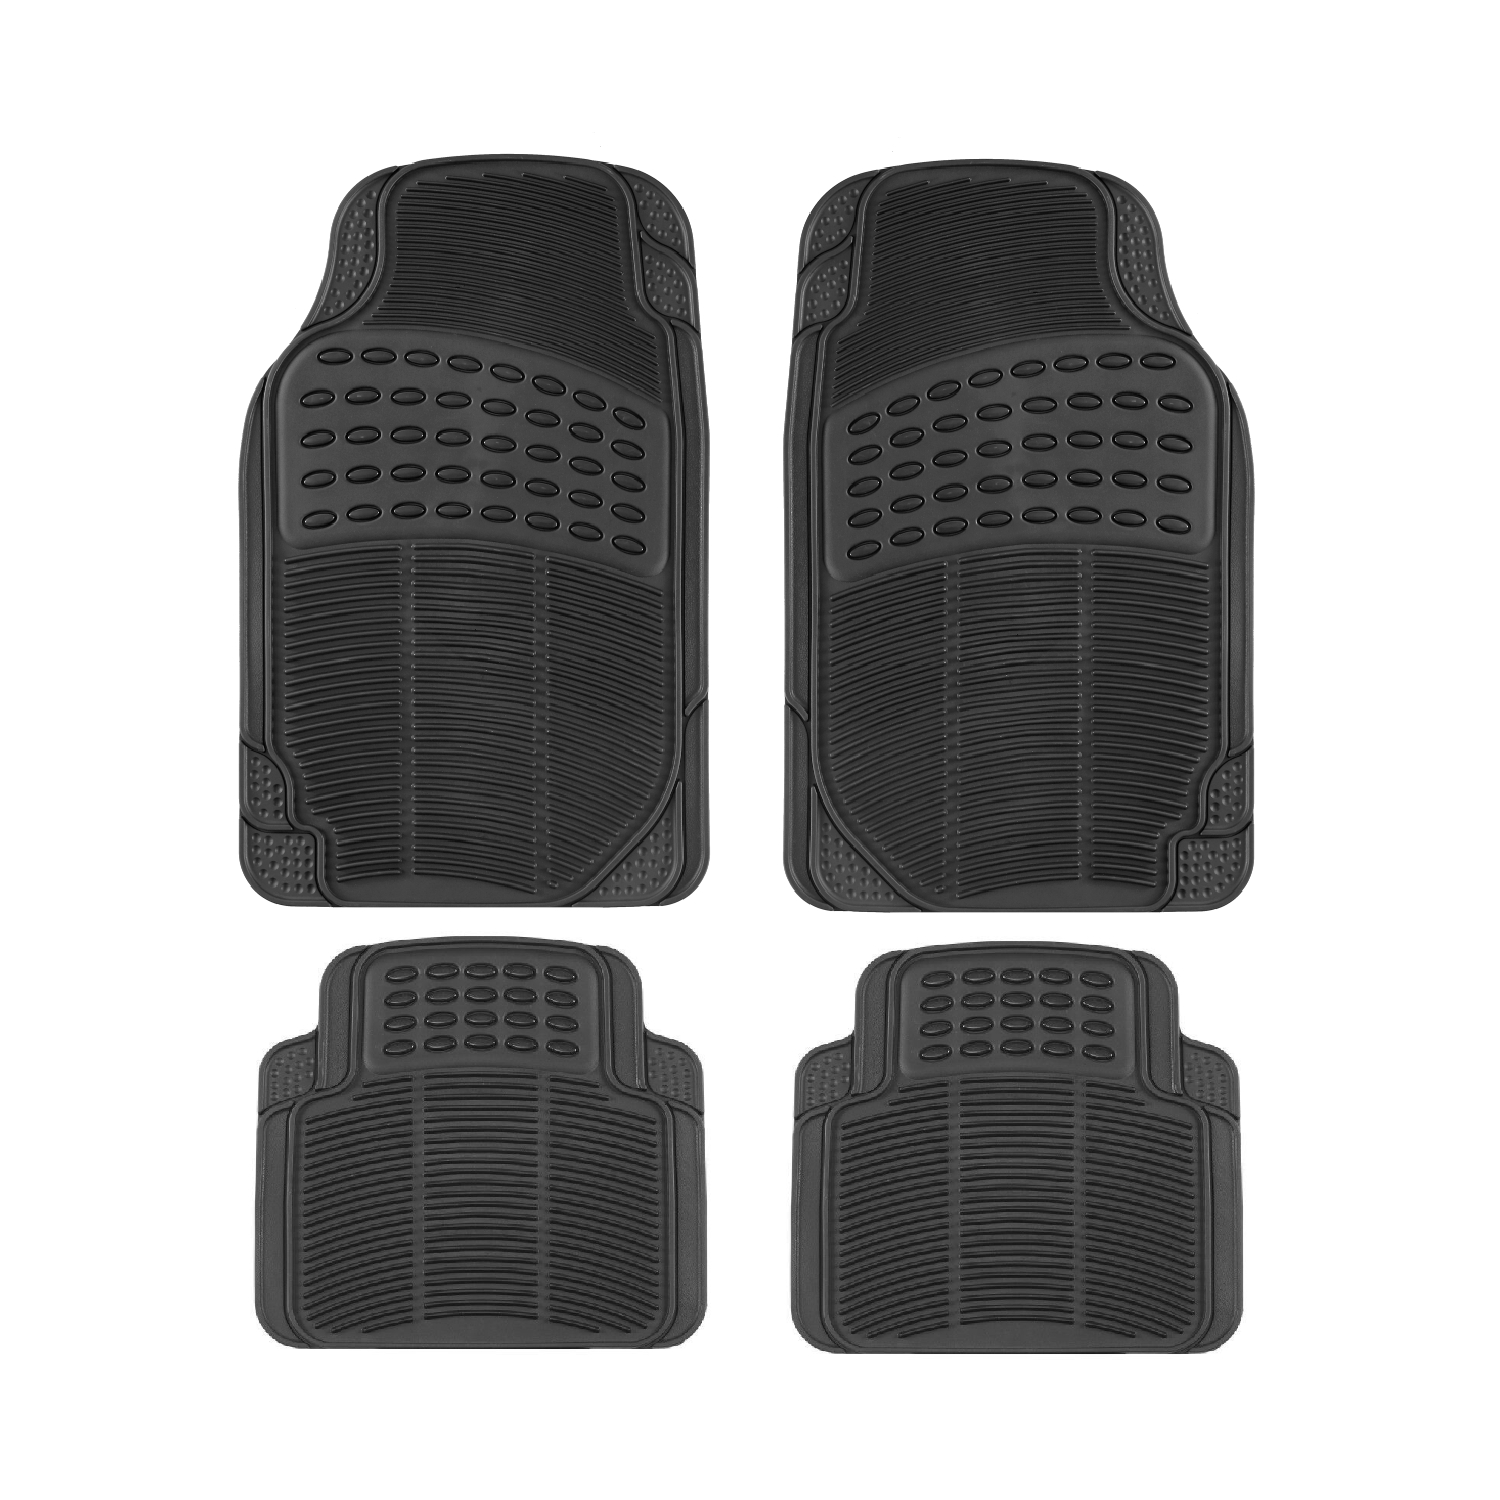 Automotive Floor Mats Black Universal Fit Heavy Duty Rubber for all weather protection , 4 Piece (Full Set Trimmable)